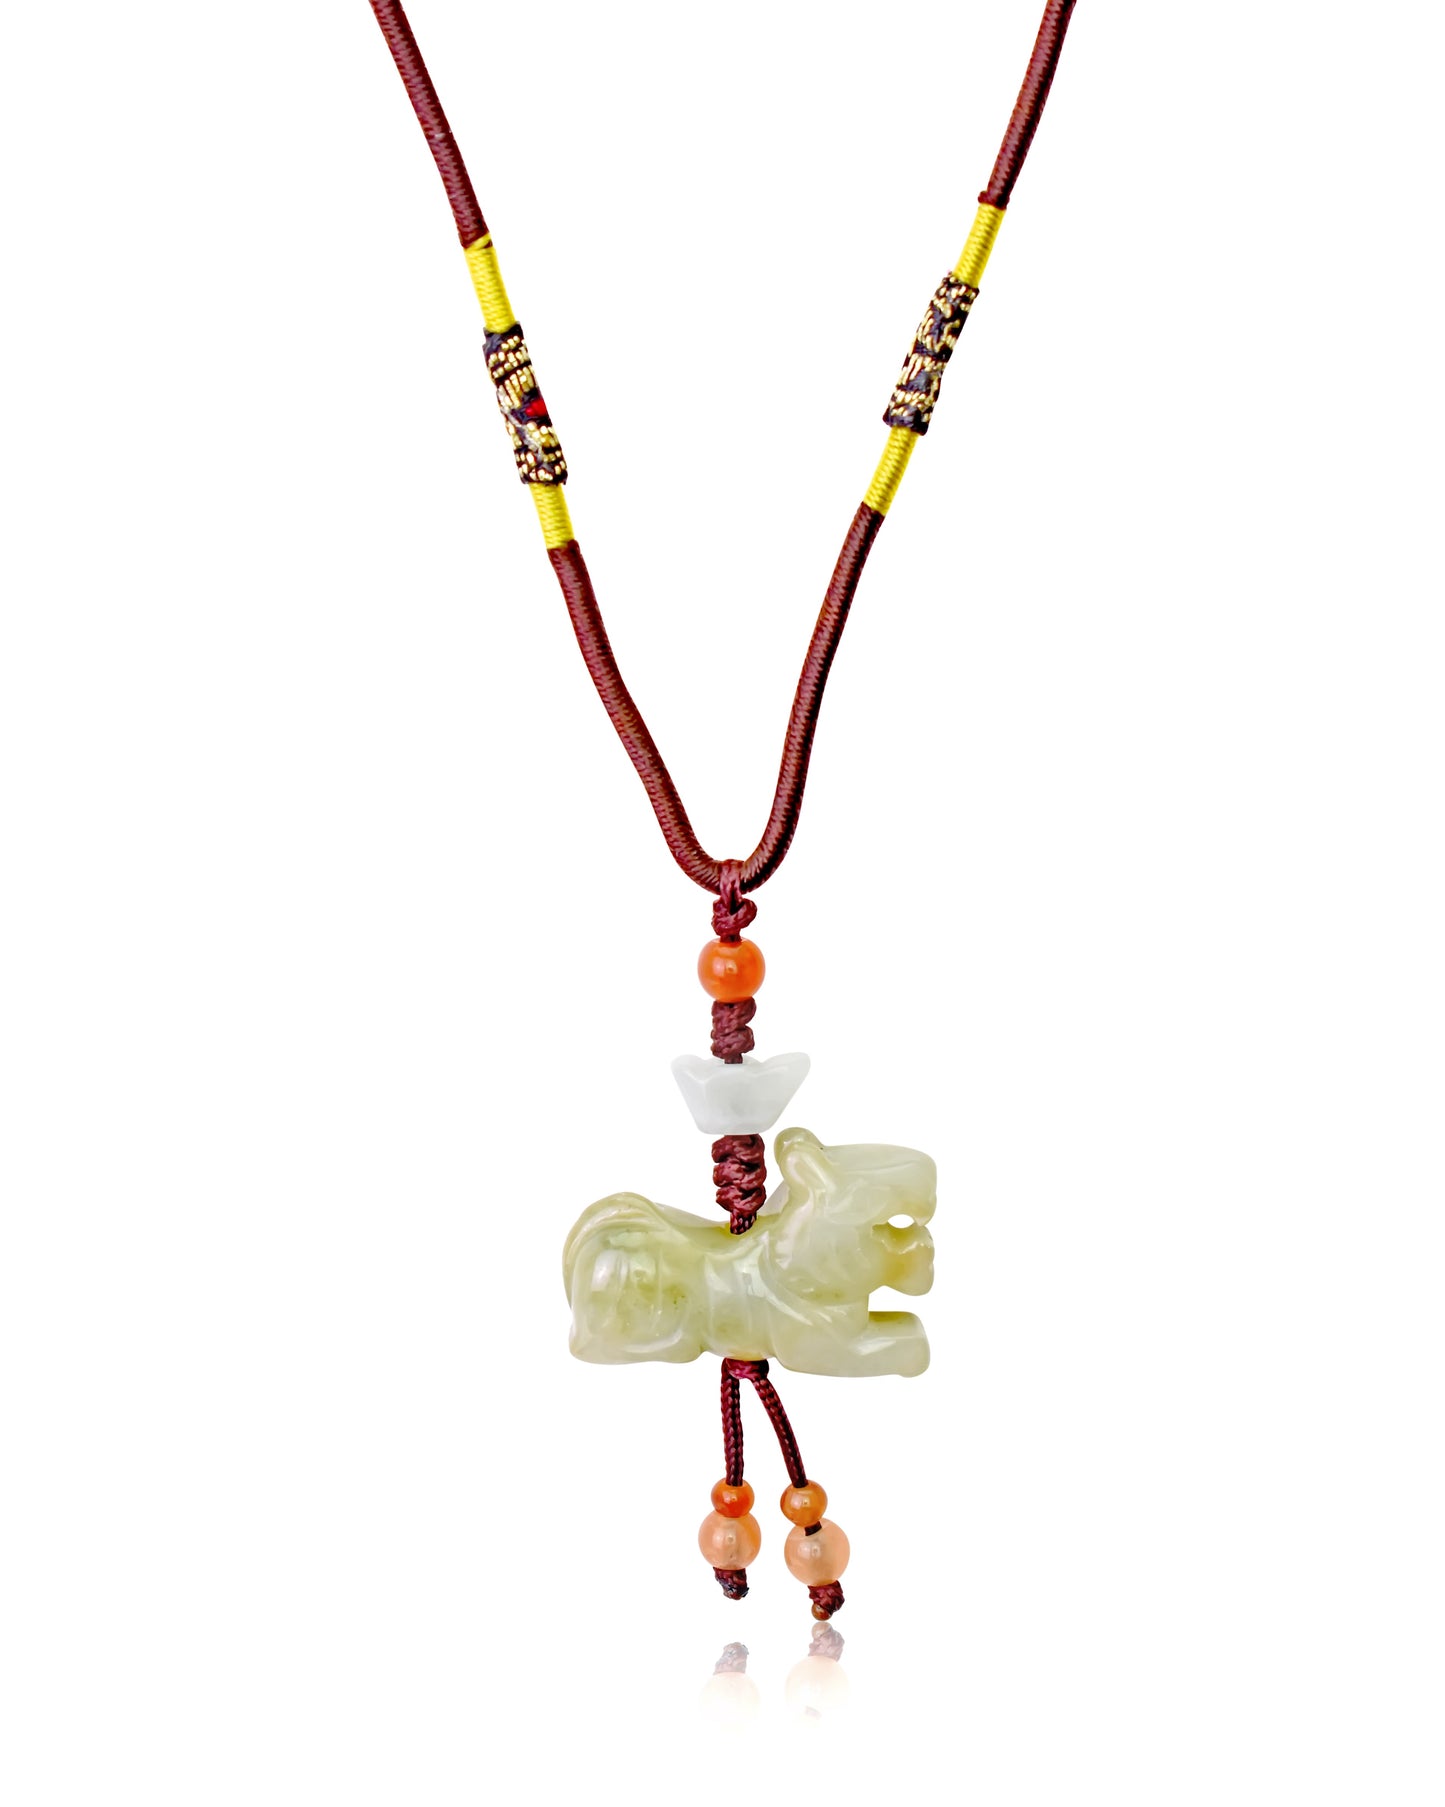 Shine with Confidence with the Tiger Chinese Zodiac Necklace made with Brown Cord